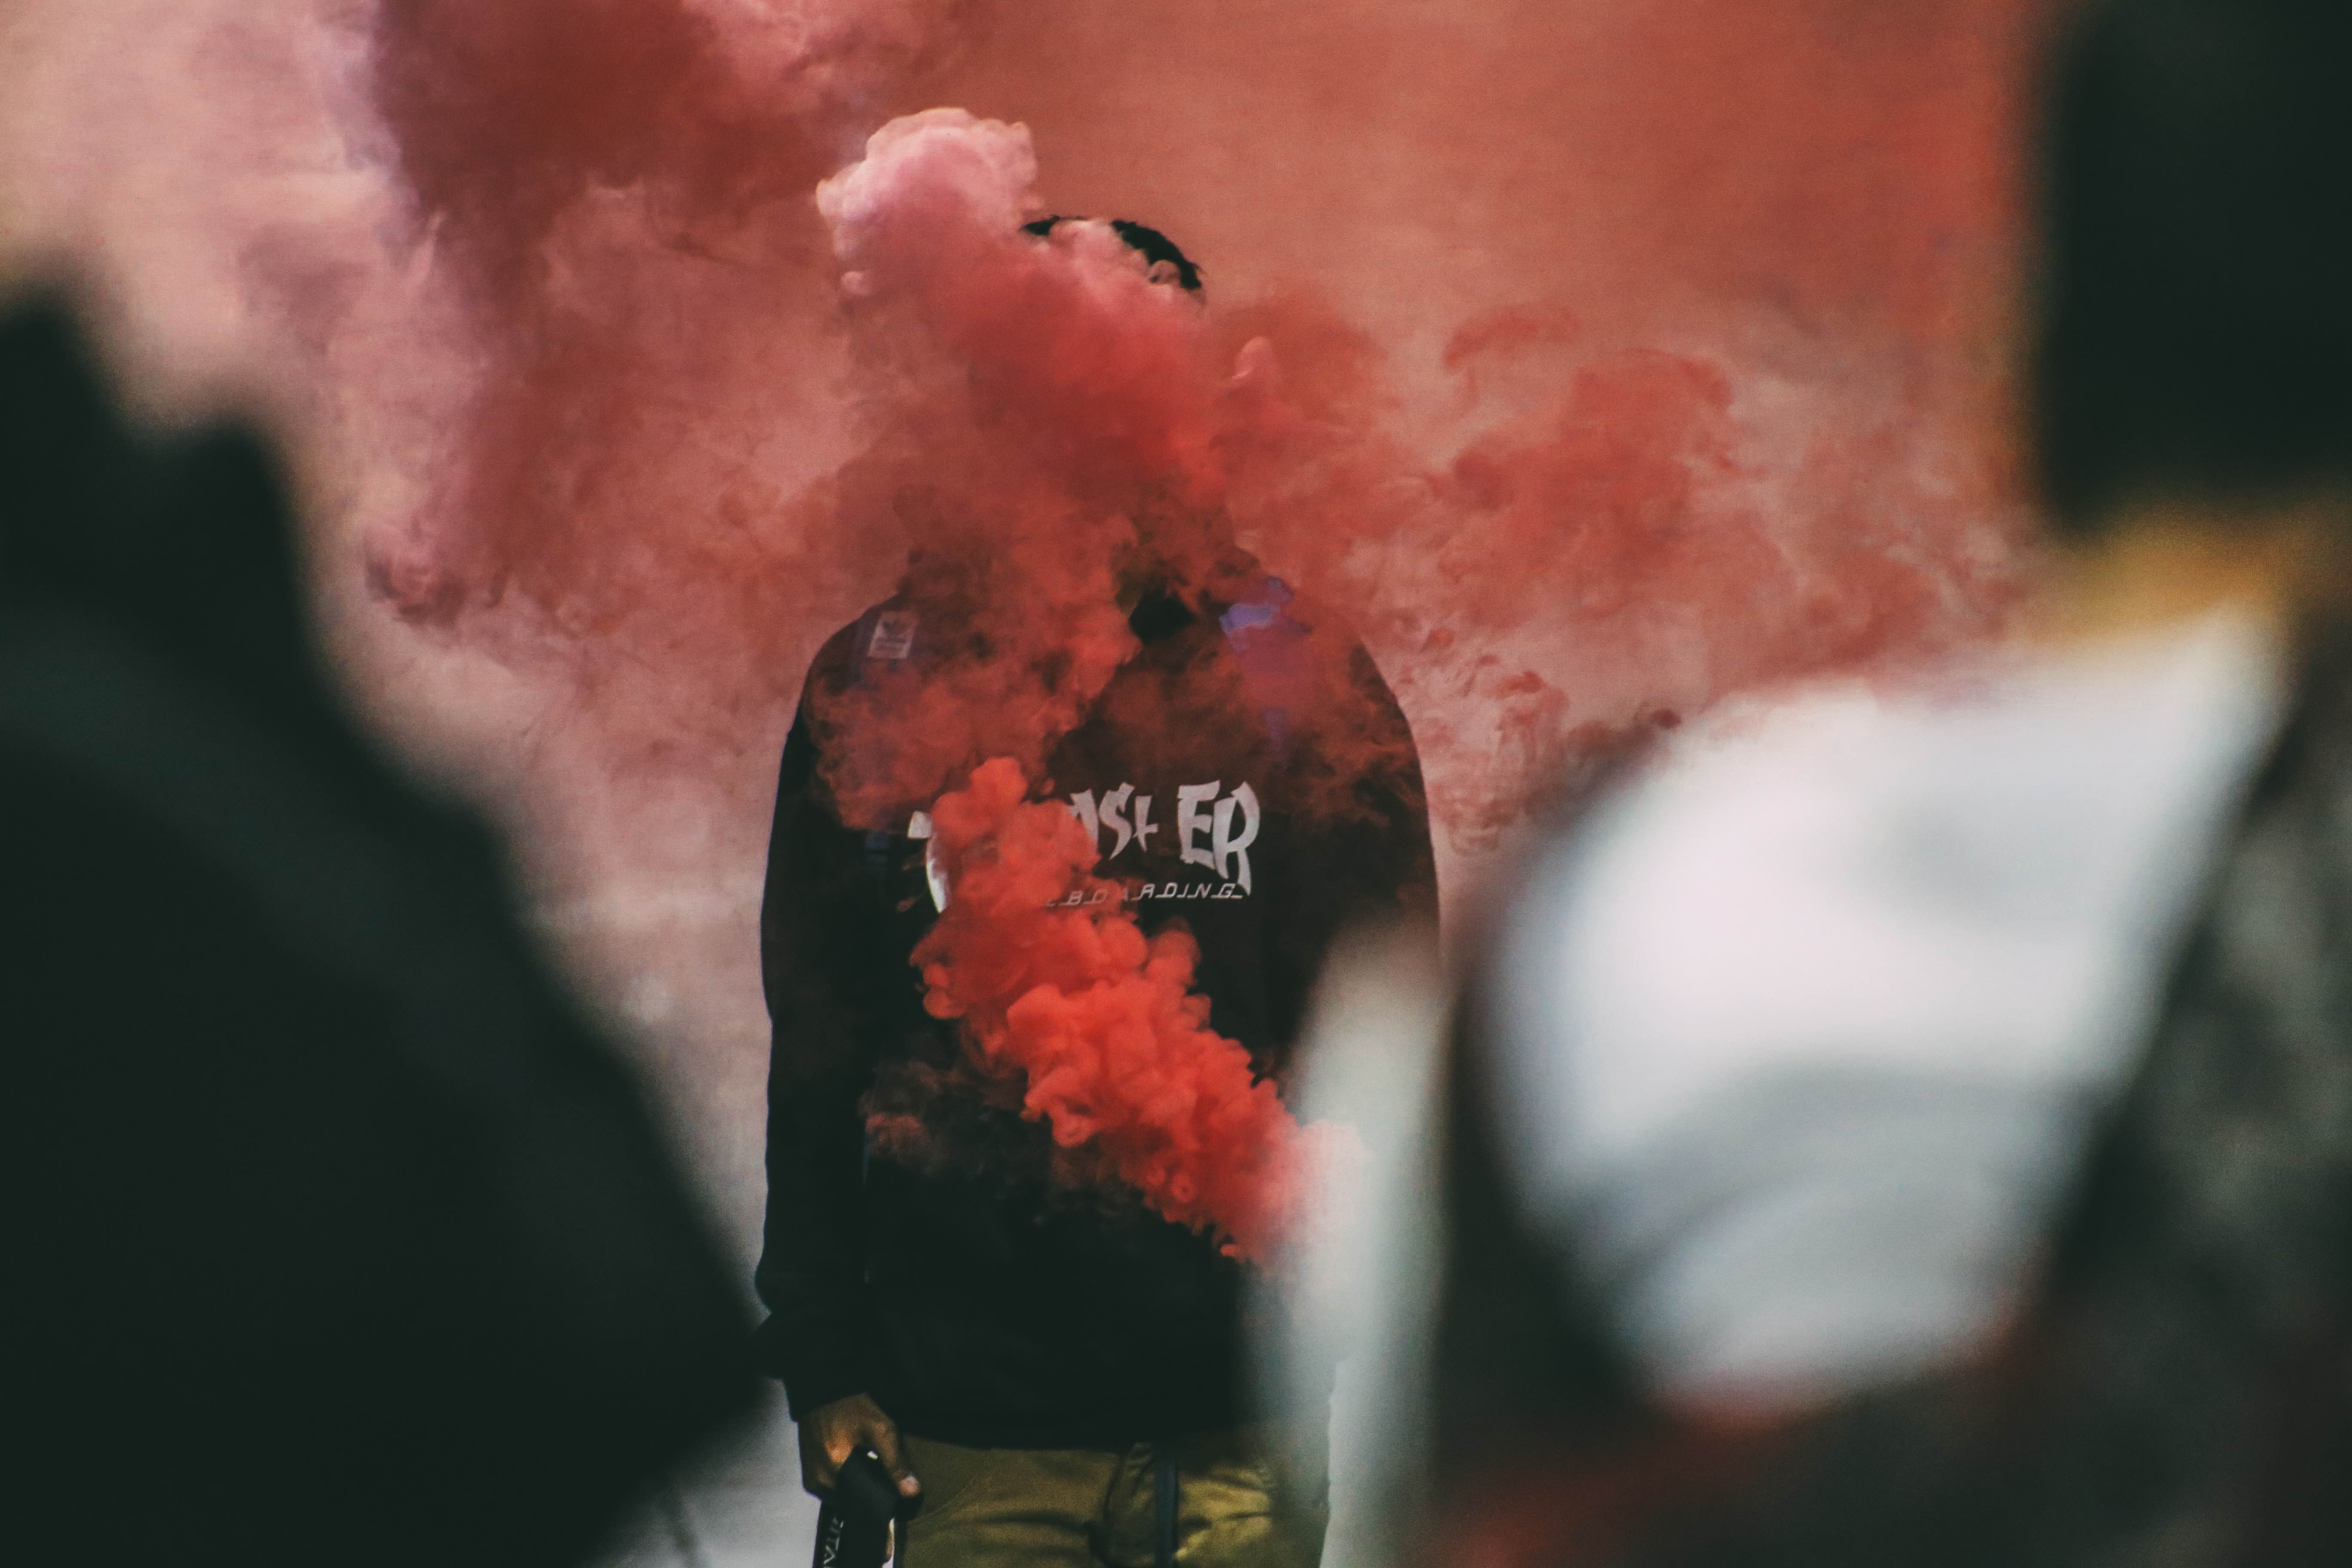 Photo by Kaique Rocha: https://www.pexels.com/photo/person-standing-surrounded-with-smoke-37819/